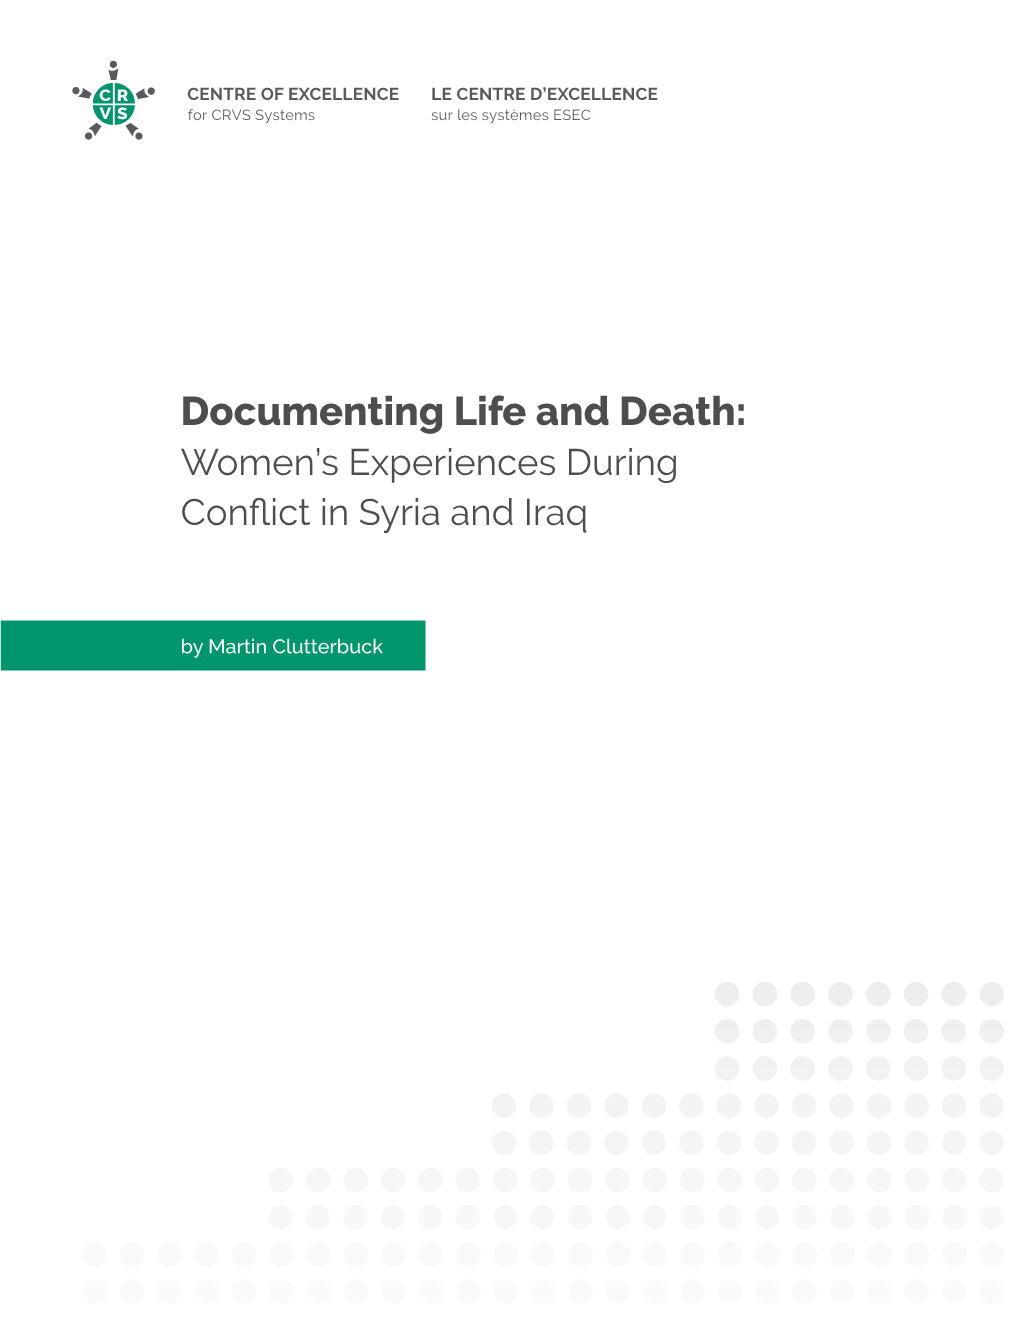 Documenting Life and Death: Women's Experiences During Conflict in Syria and Iraq